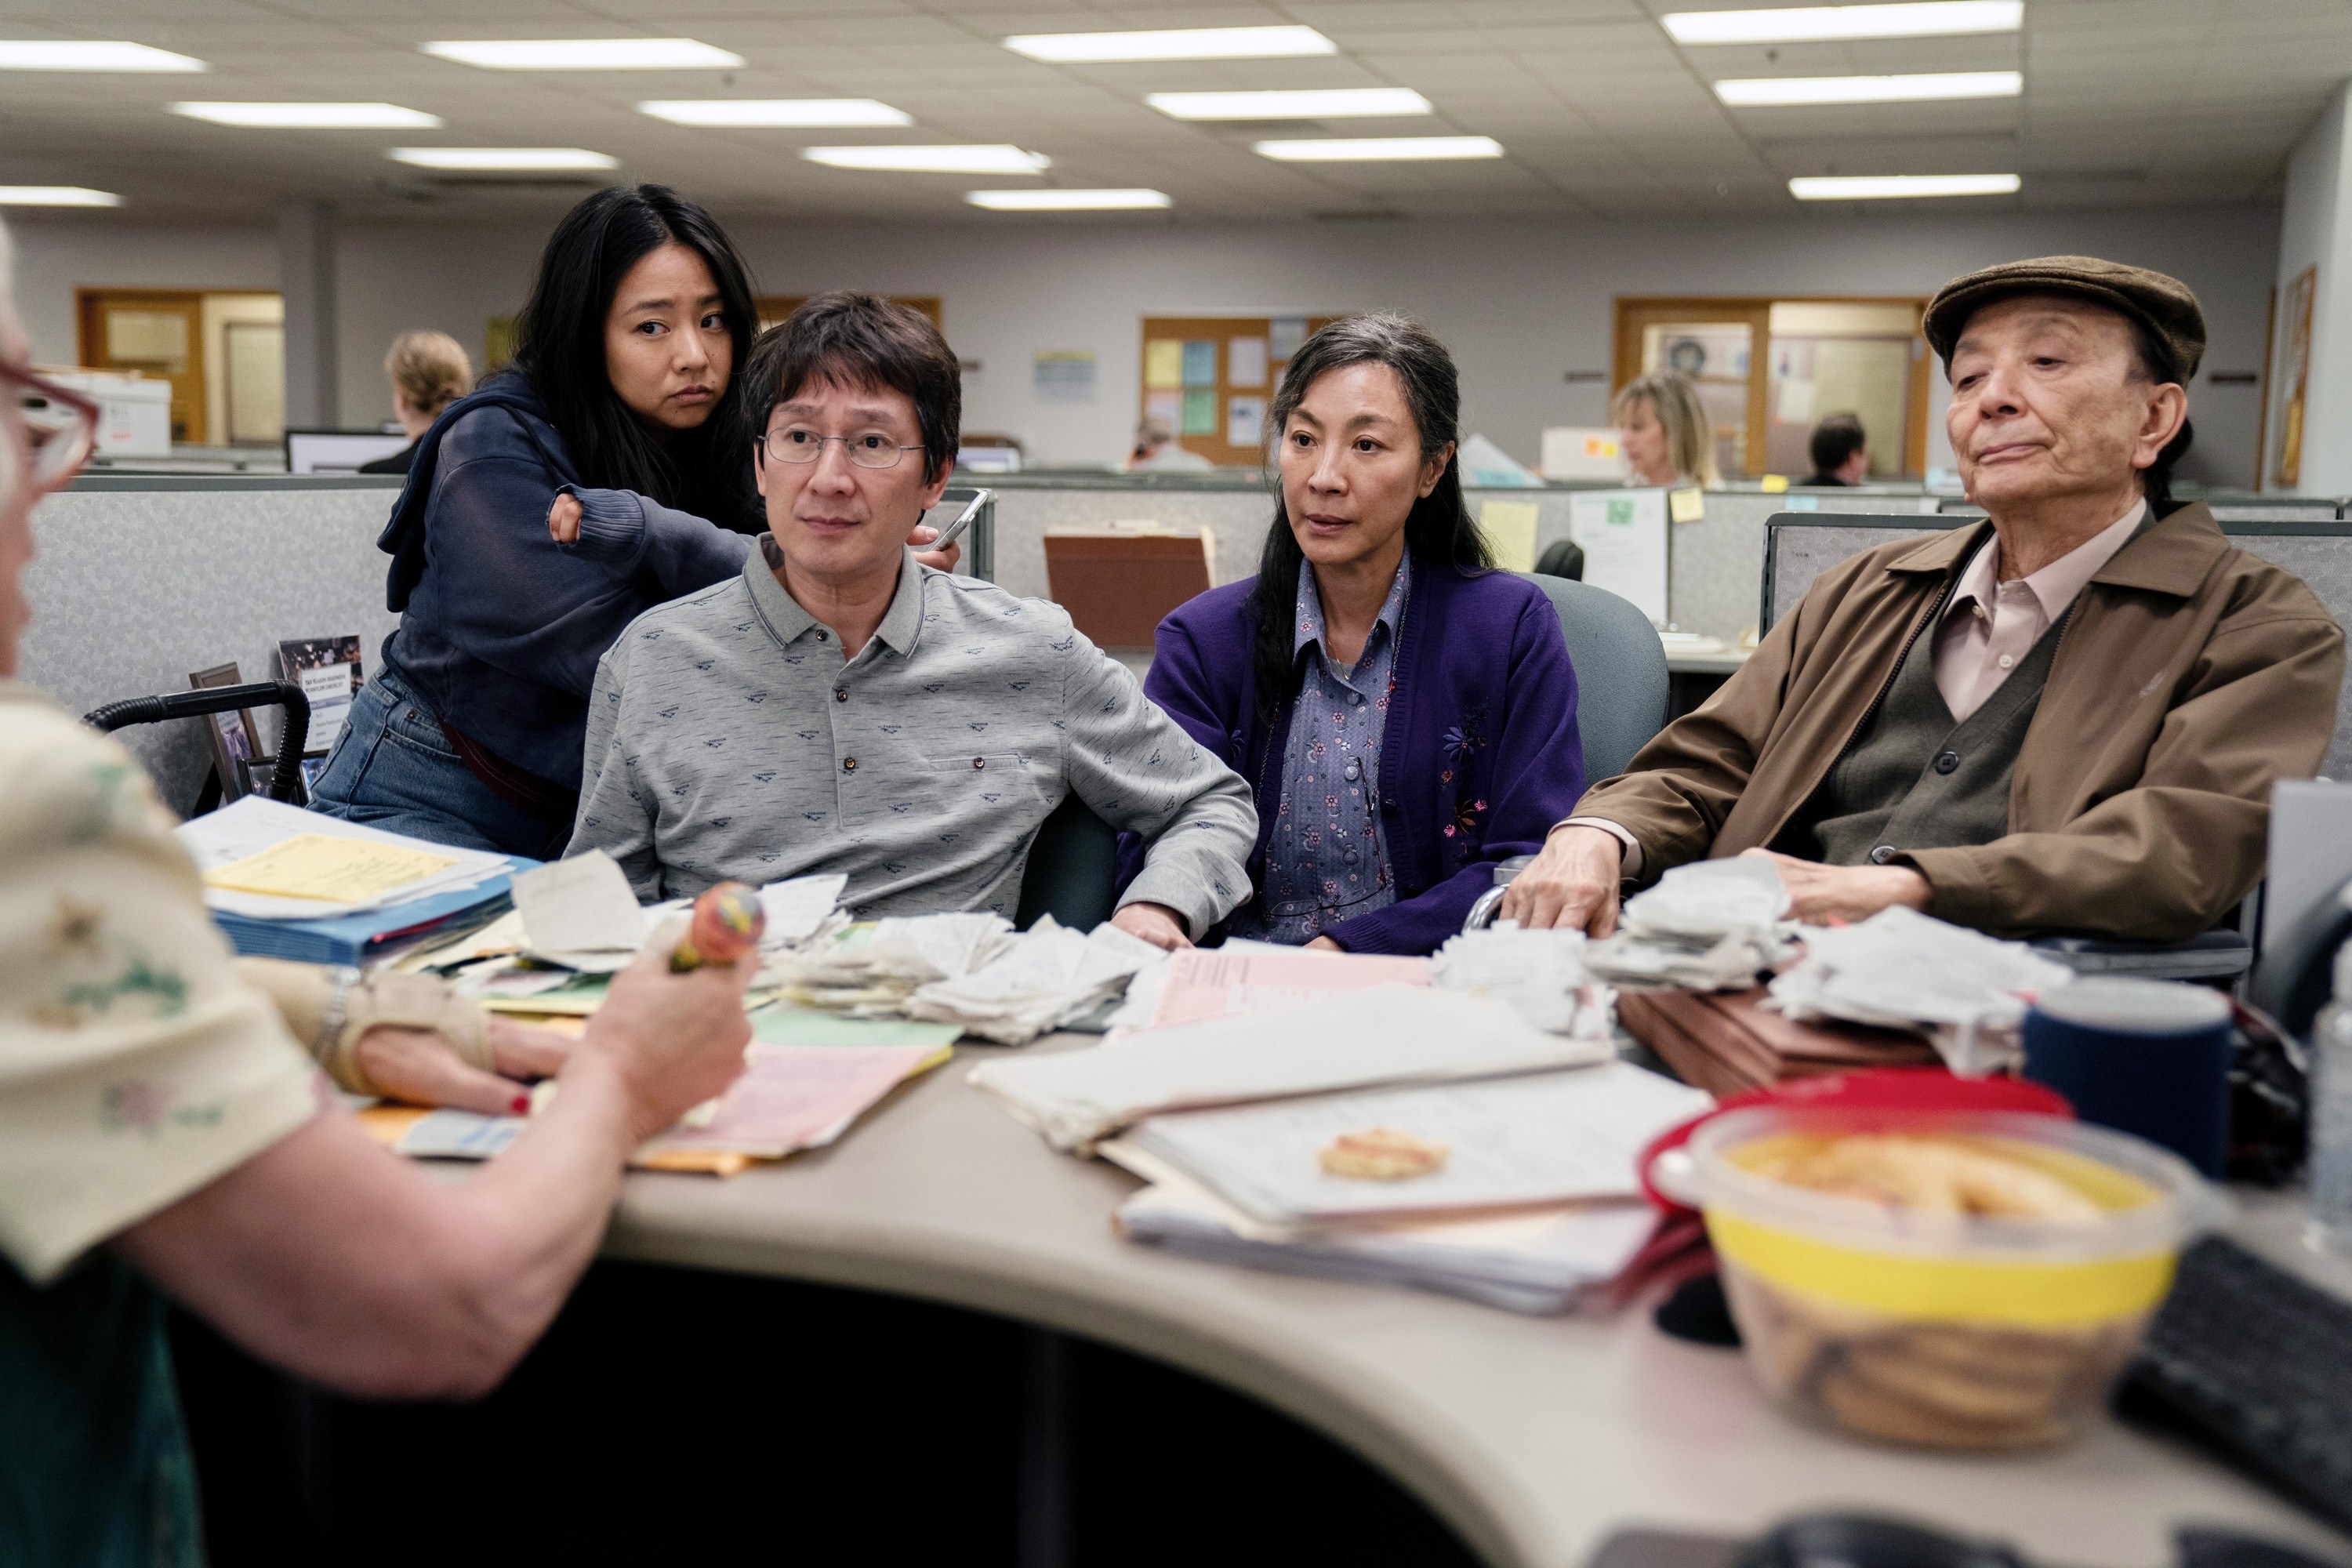 Members of the Wang family in Everything Everywhere sit in front of a desk in an office